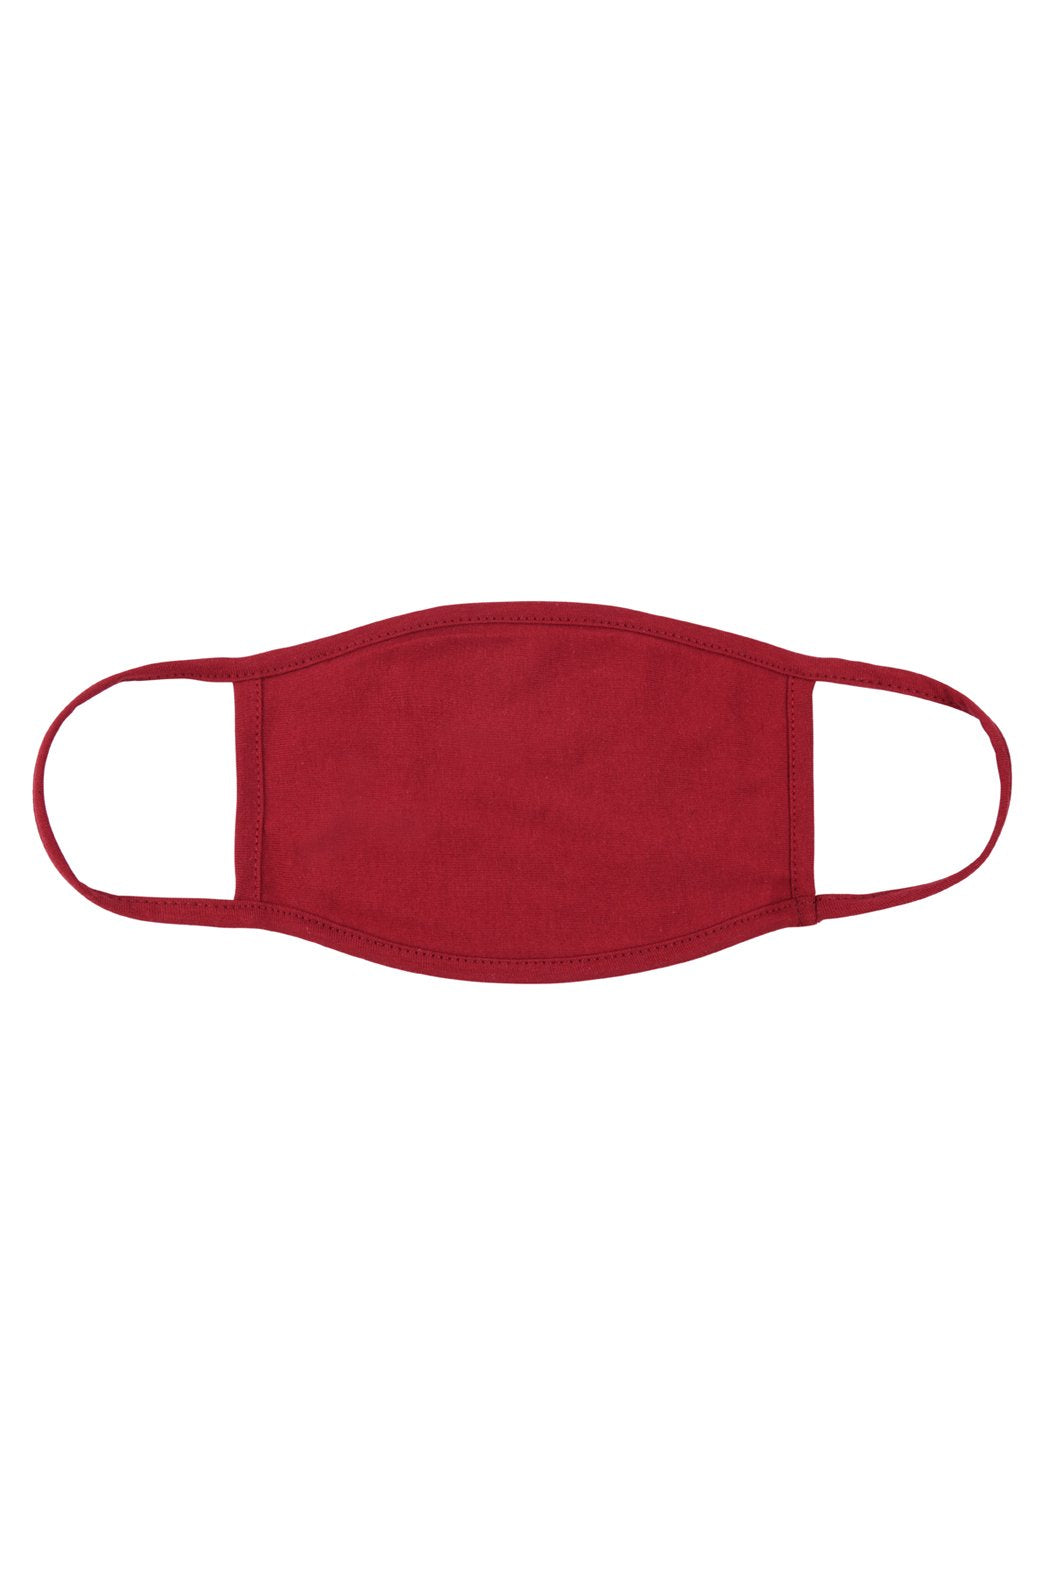 Rfm8002-Ct - Plain Reusable Face Mask for Adults With Filter Pocket